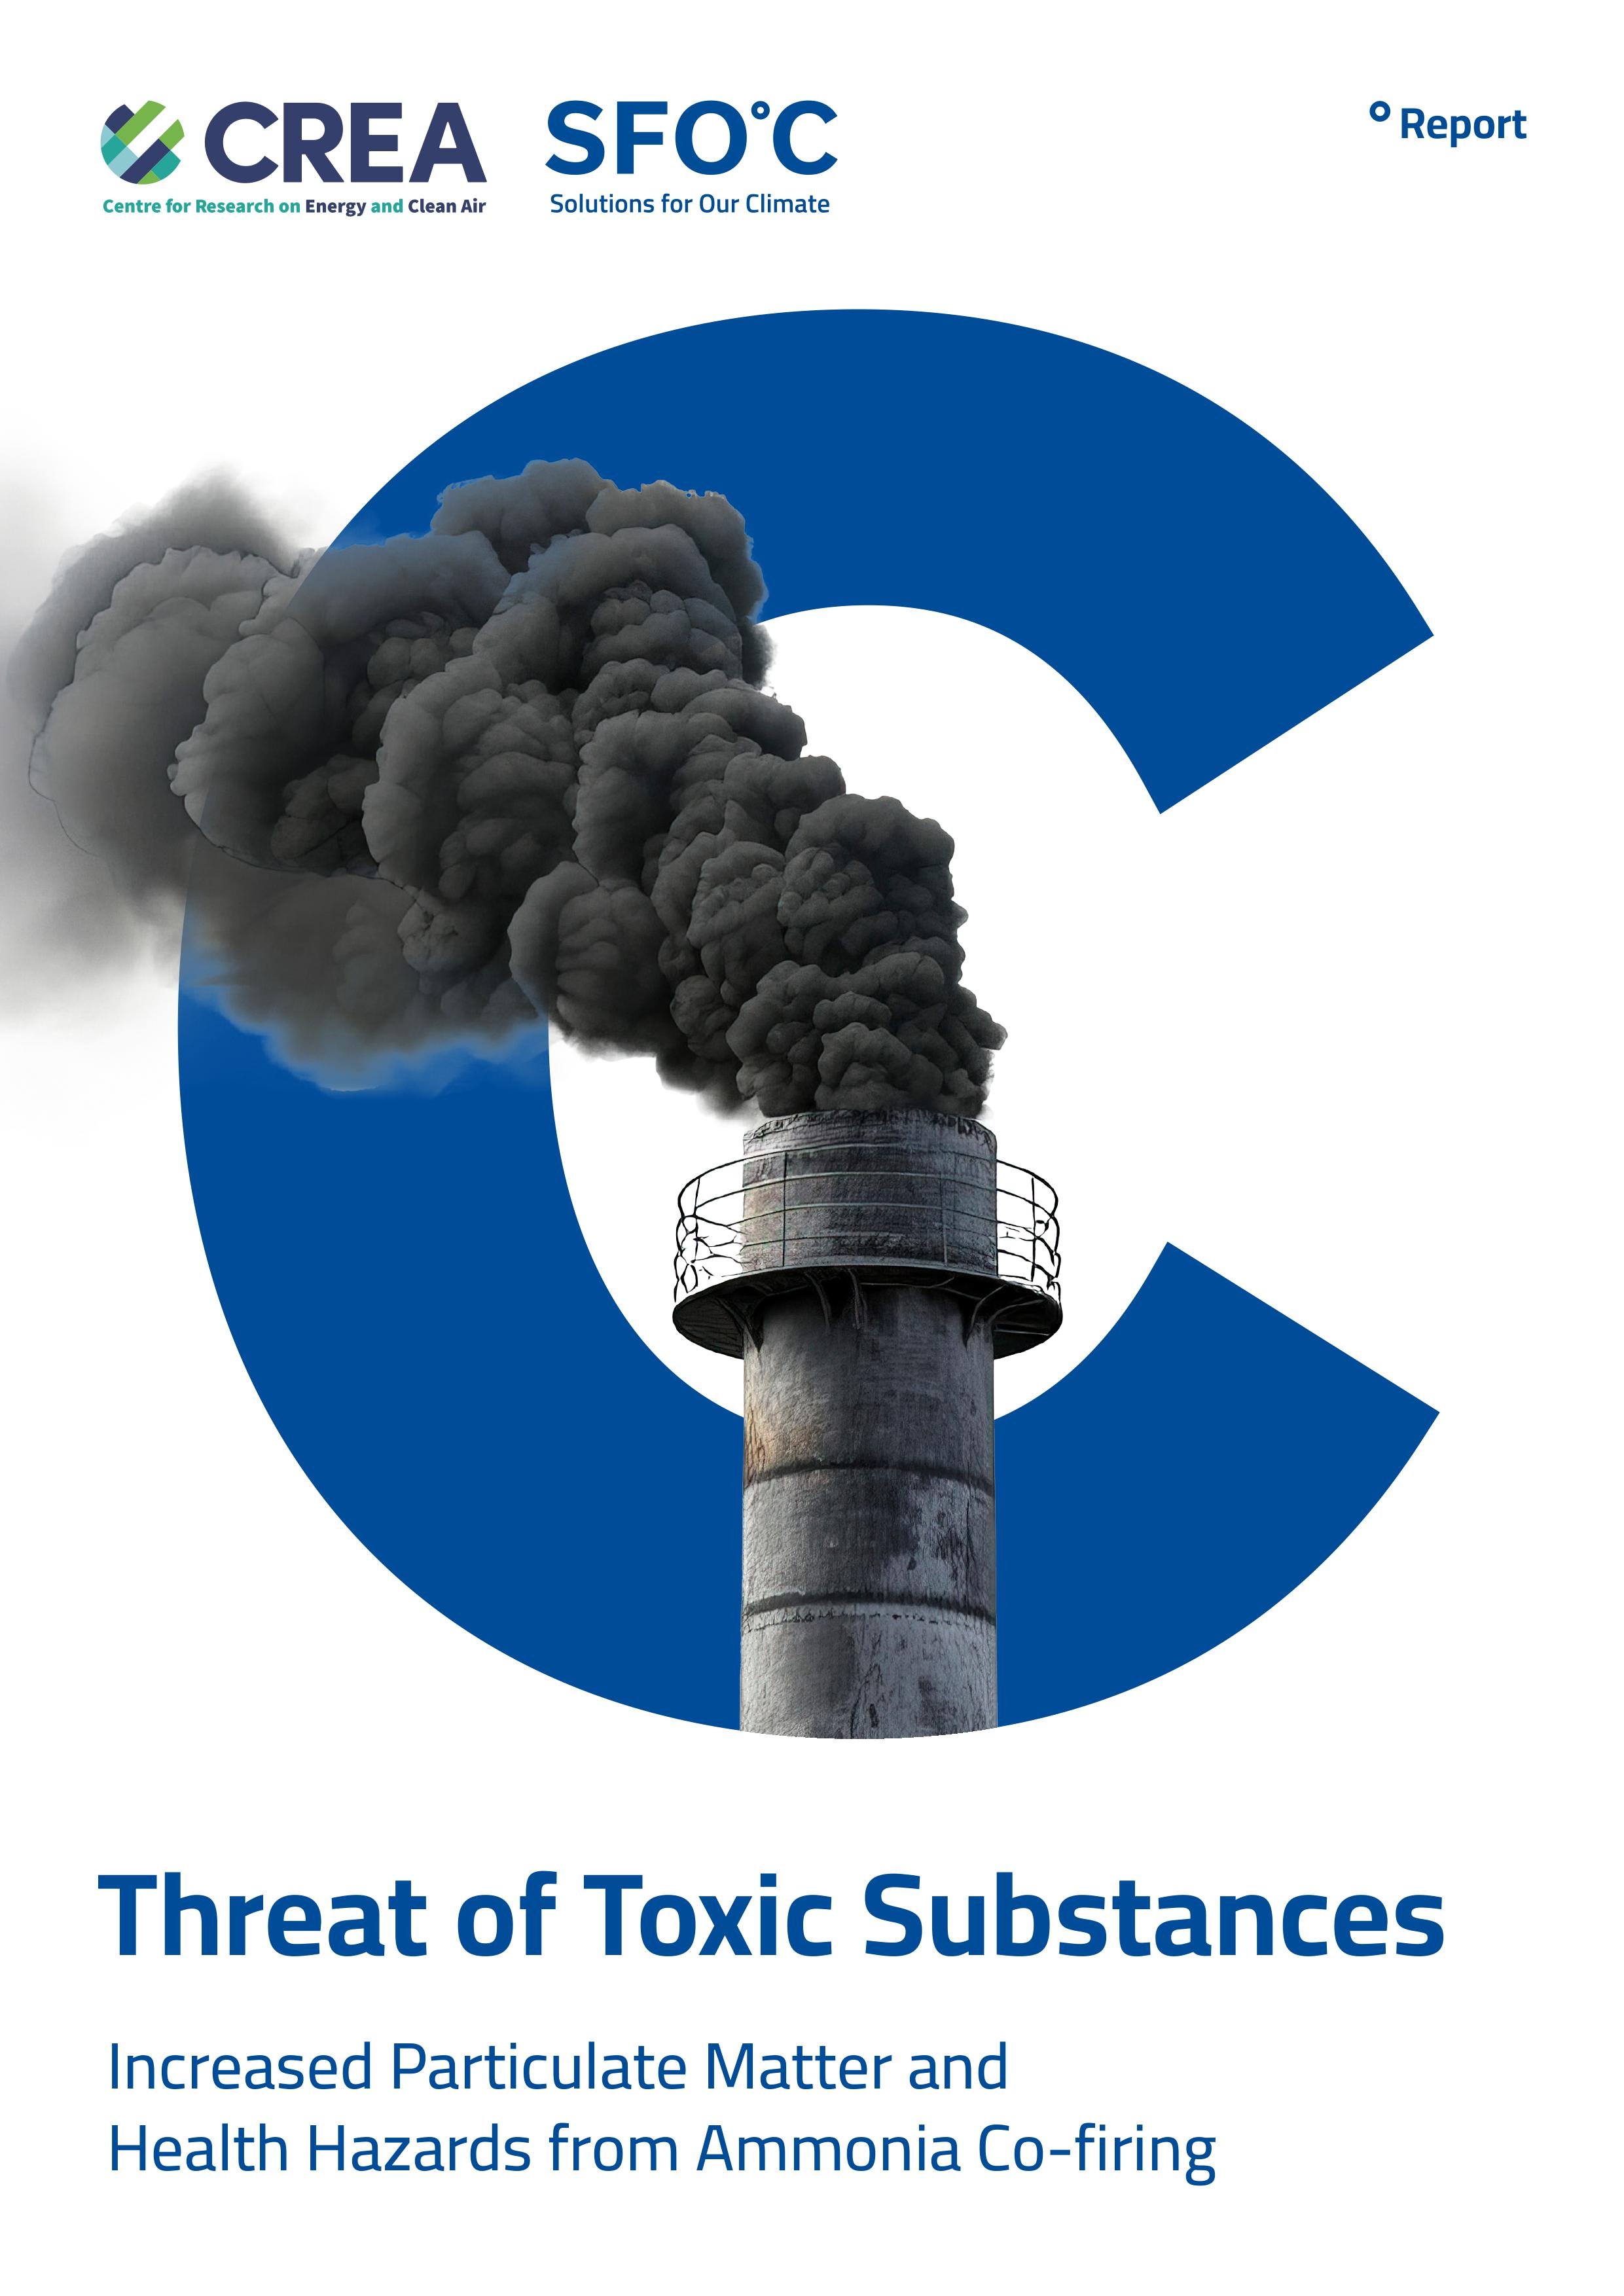 Threat of Toxic Substances: Increased Particulate Matter and Health Hazards from Ammonia Co-firing